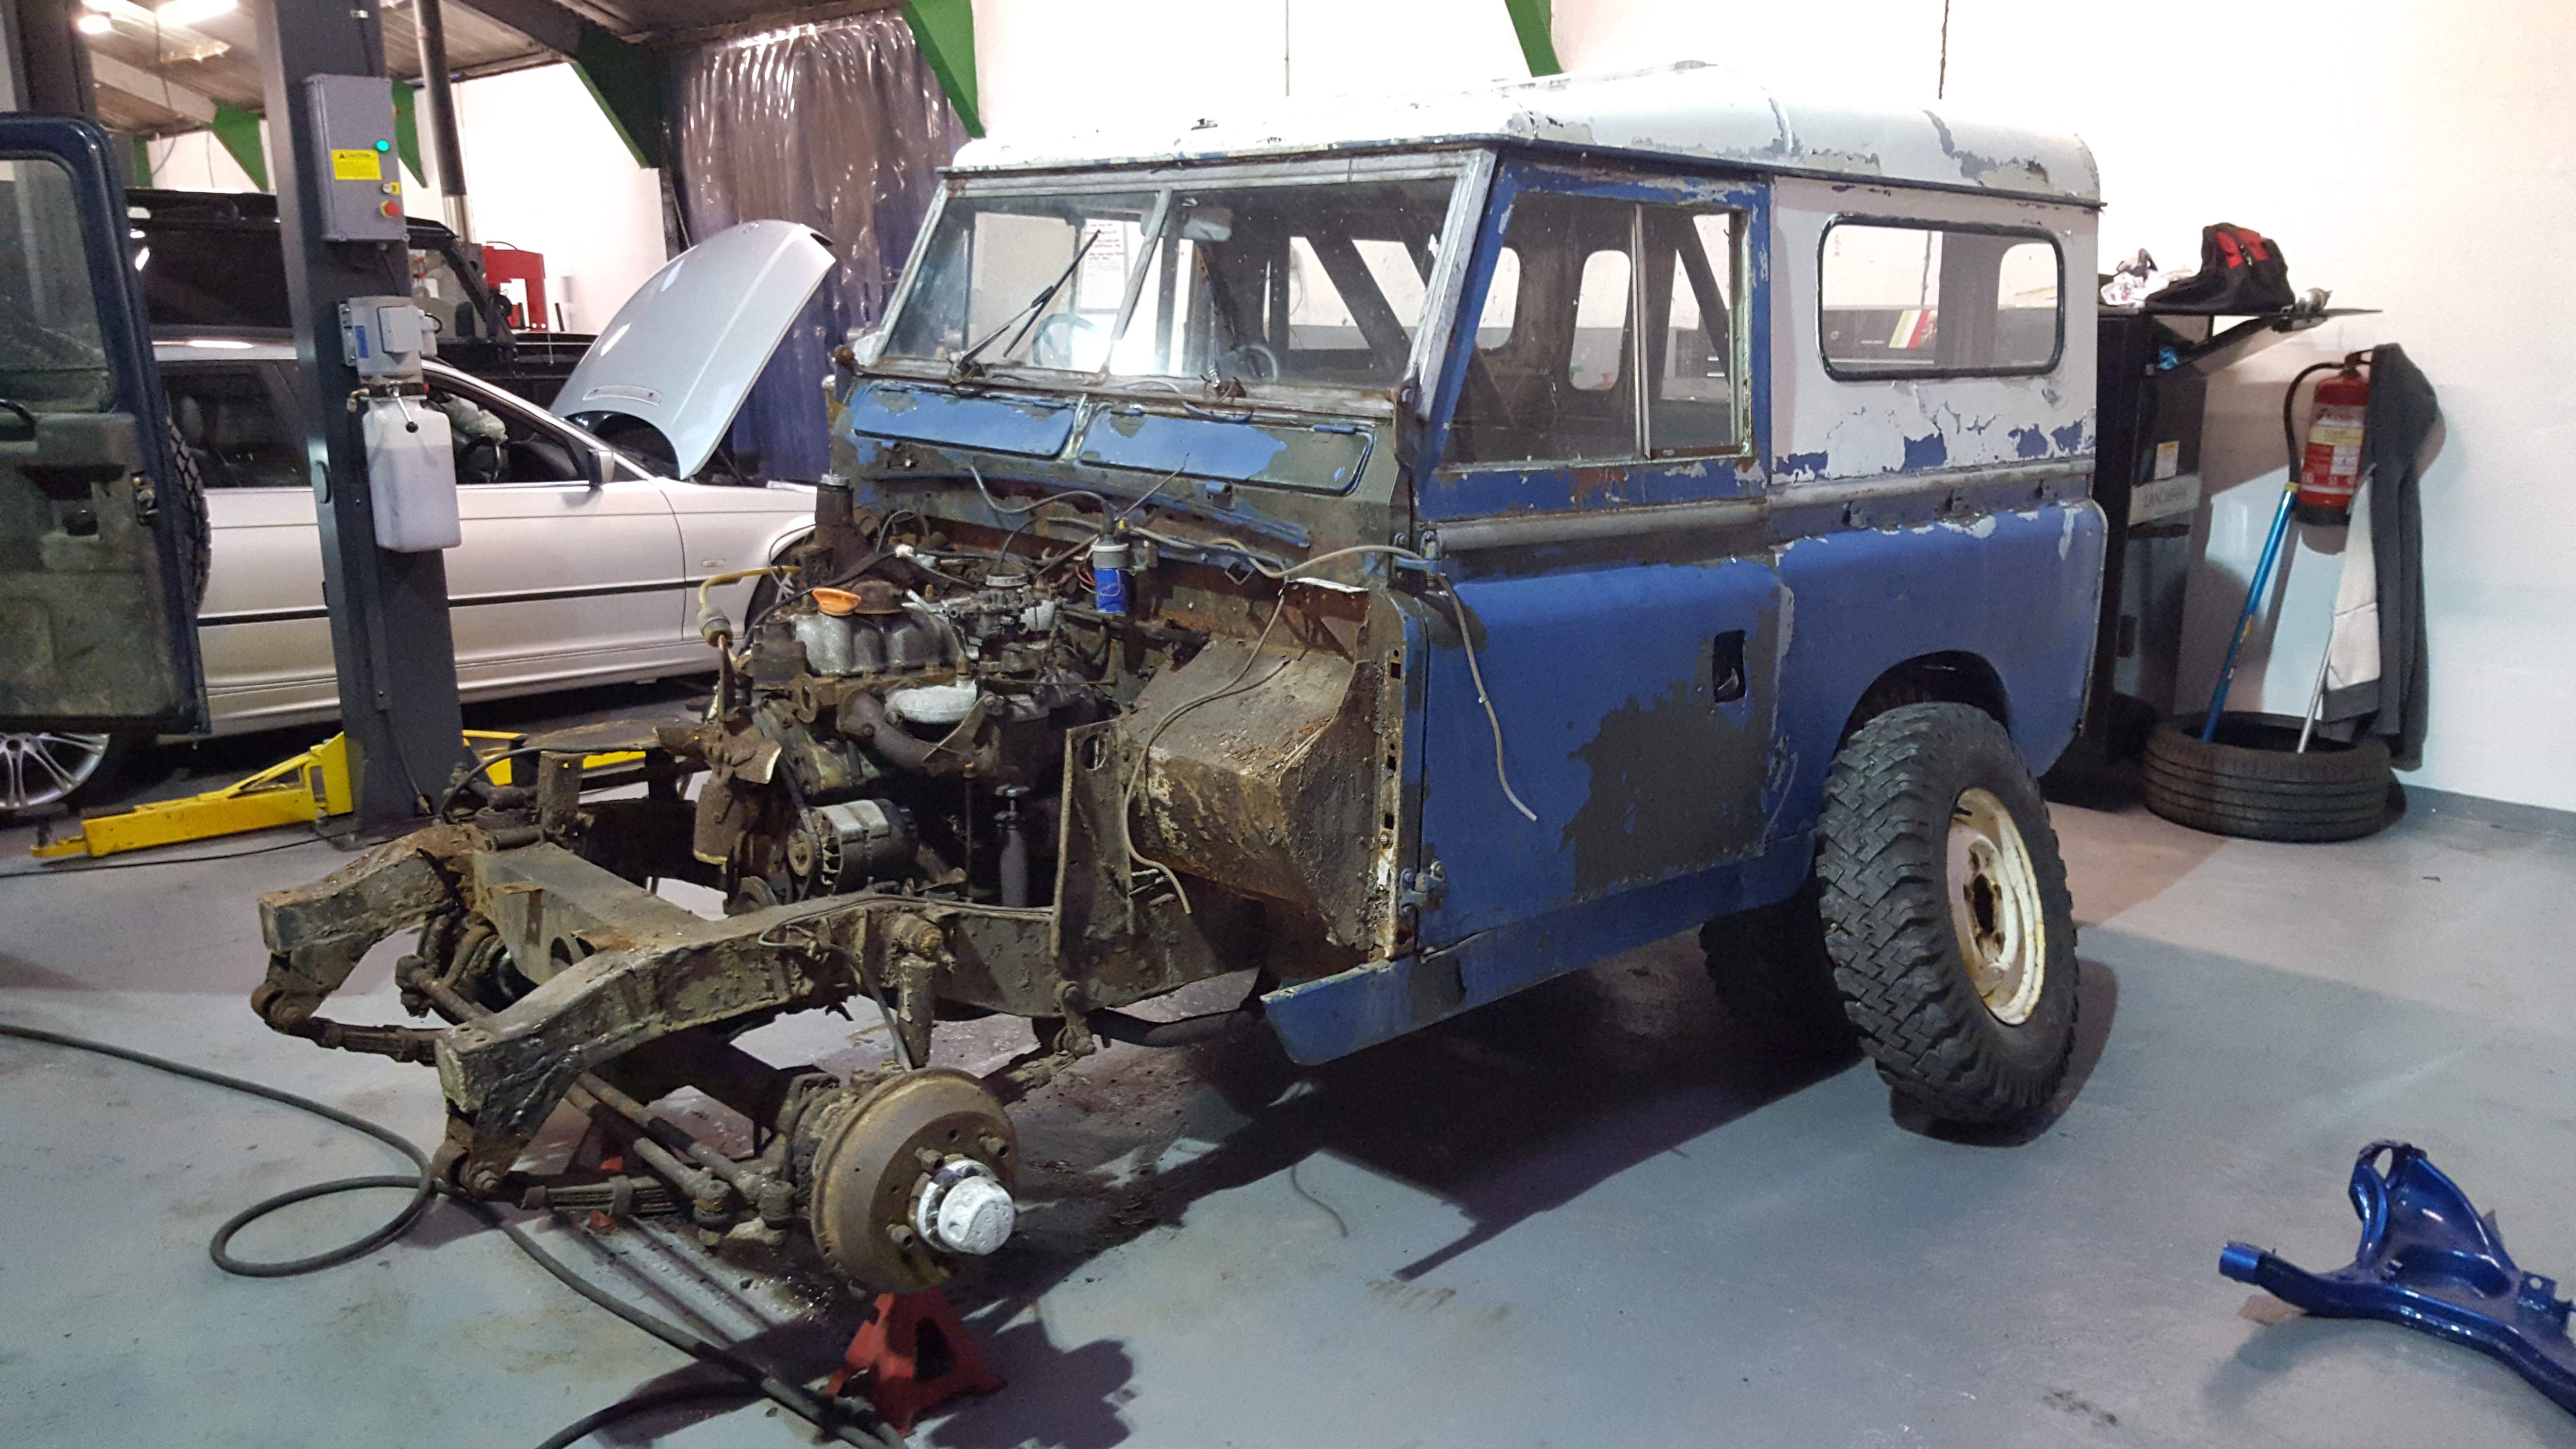 Gibsons Auto Services specialise in Ladn Rover restoration and rebuilds